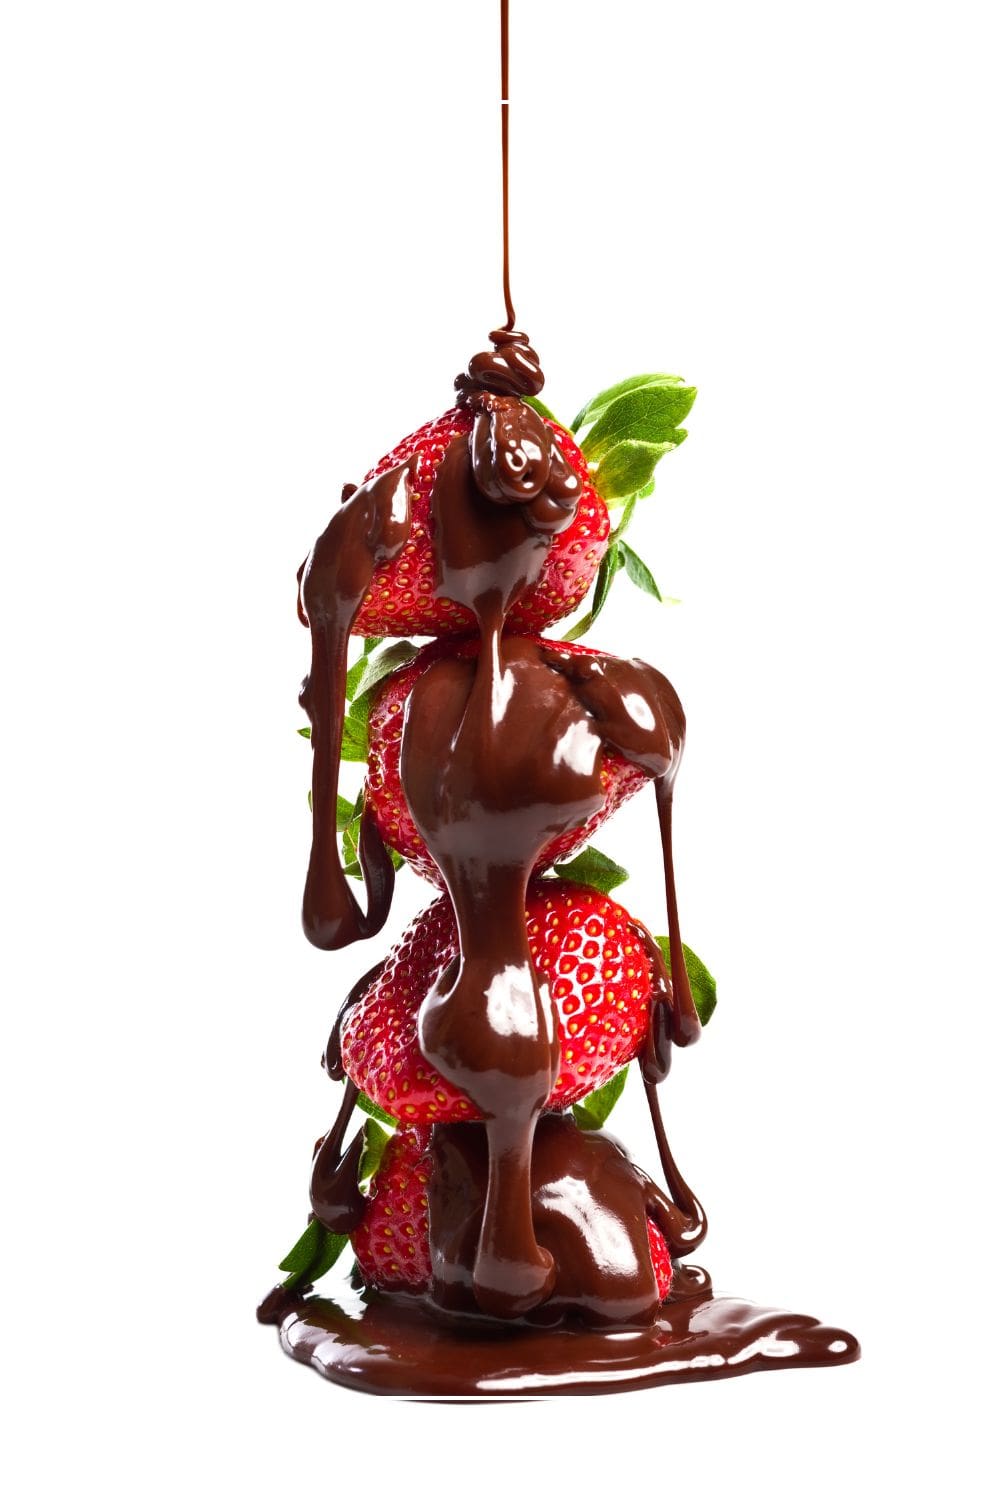 Drizzling chocolate syrup over a stack of fresh strawberries